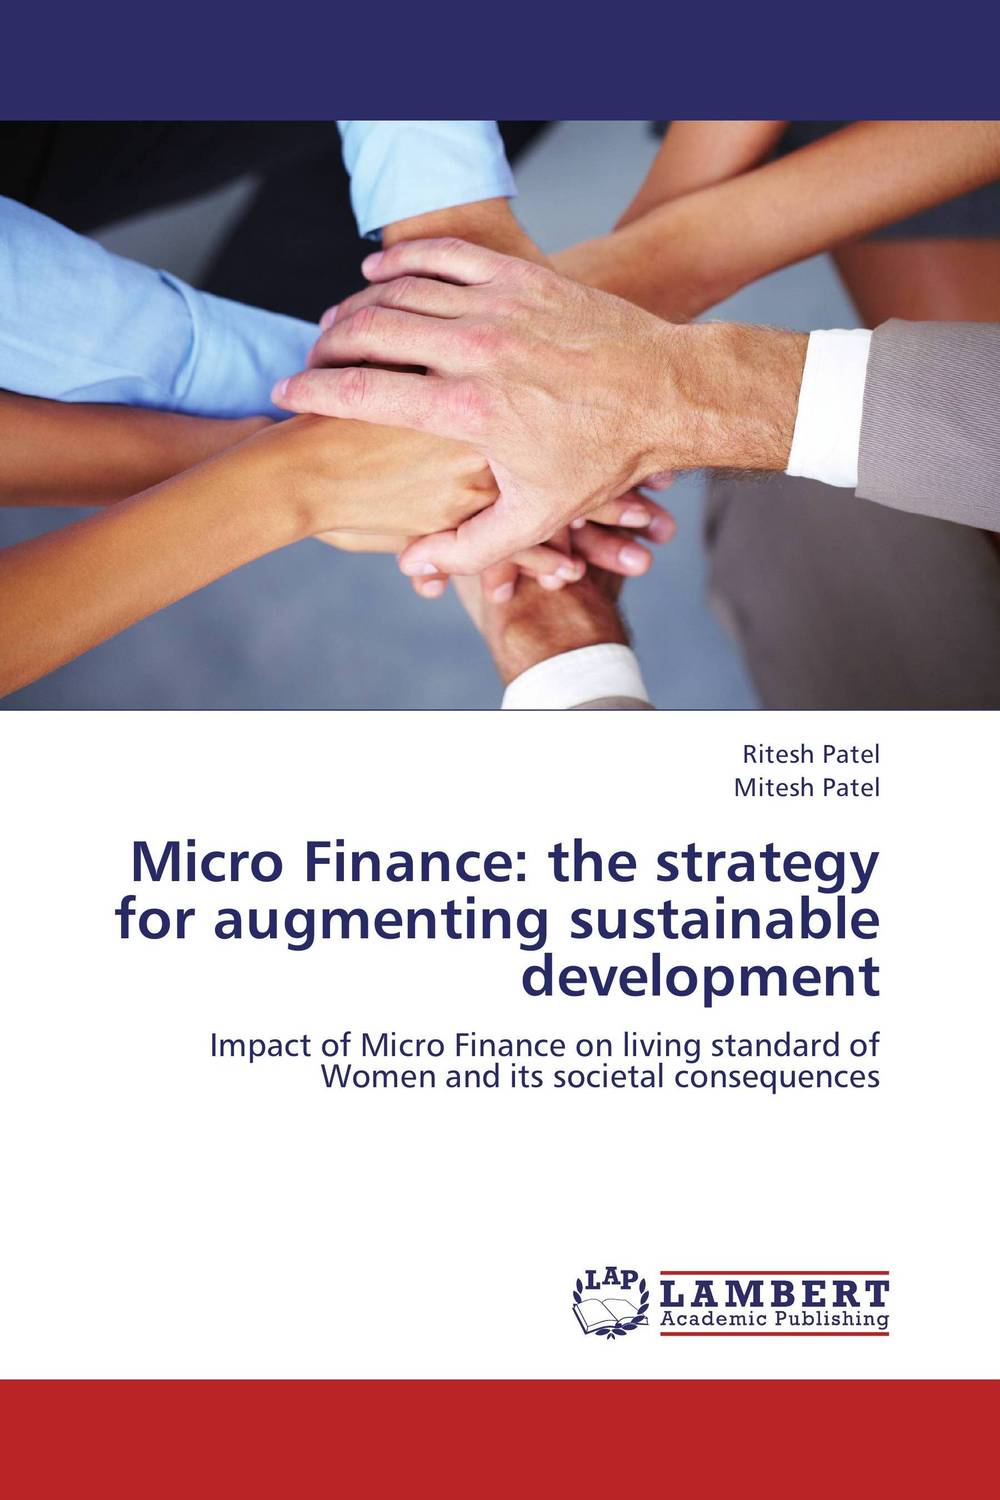 Micro Finance: the strategy for augmenting sustainable development